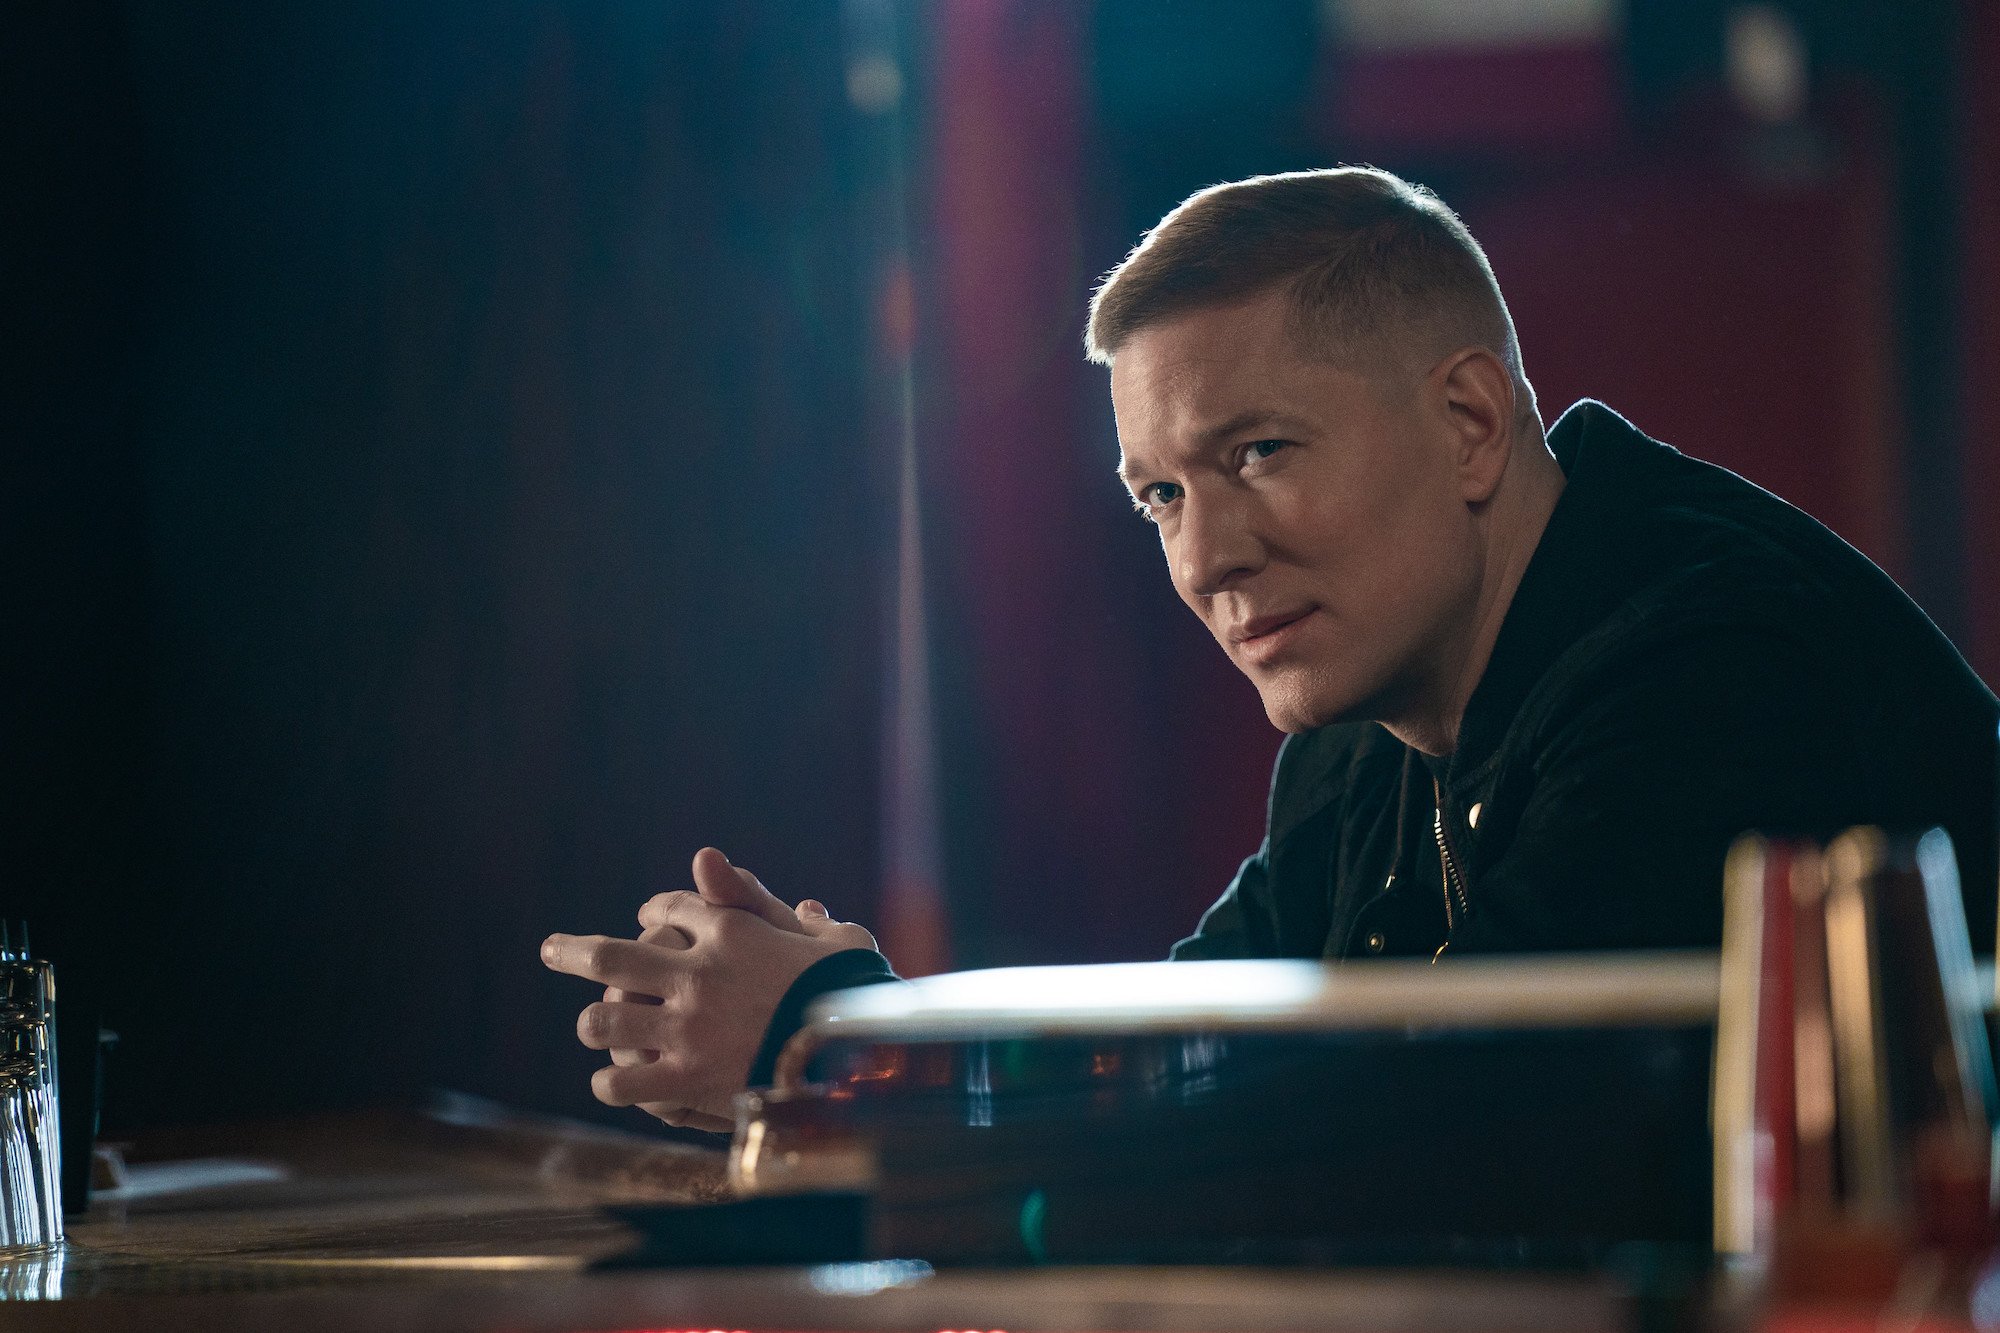 'Power: Book IV: Force' star Joseph Sikora sits at a desk with his hands folded